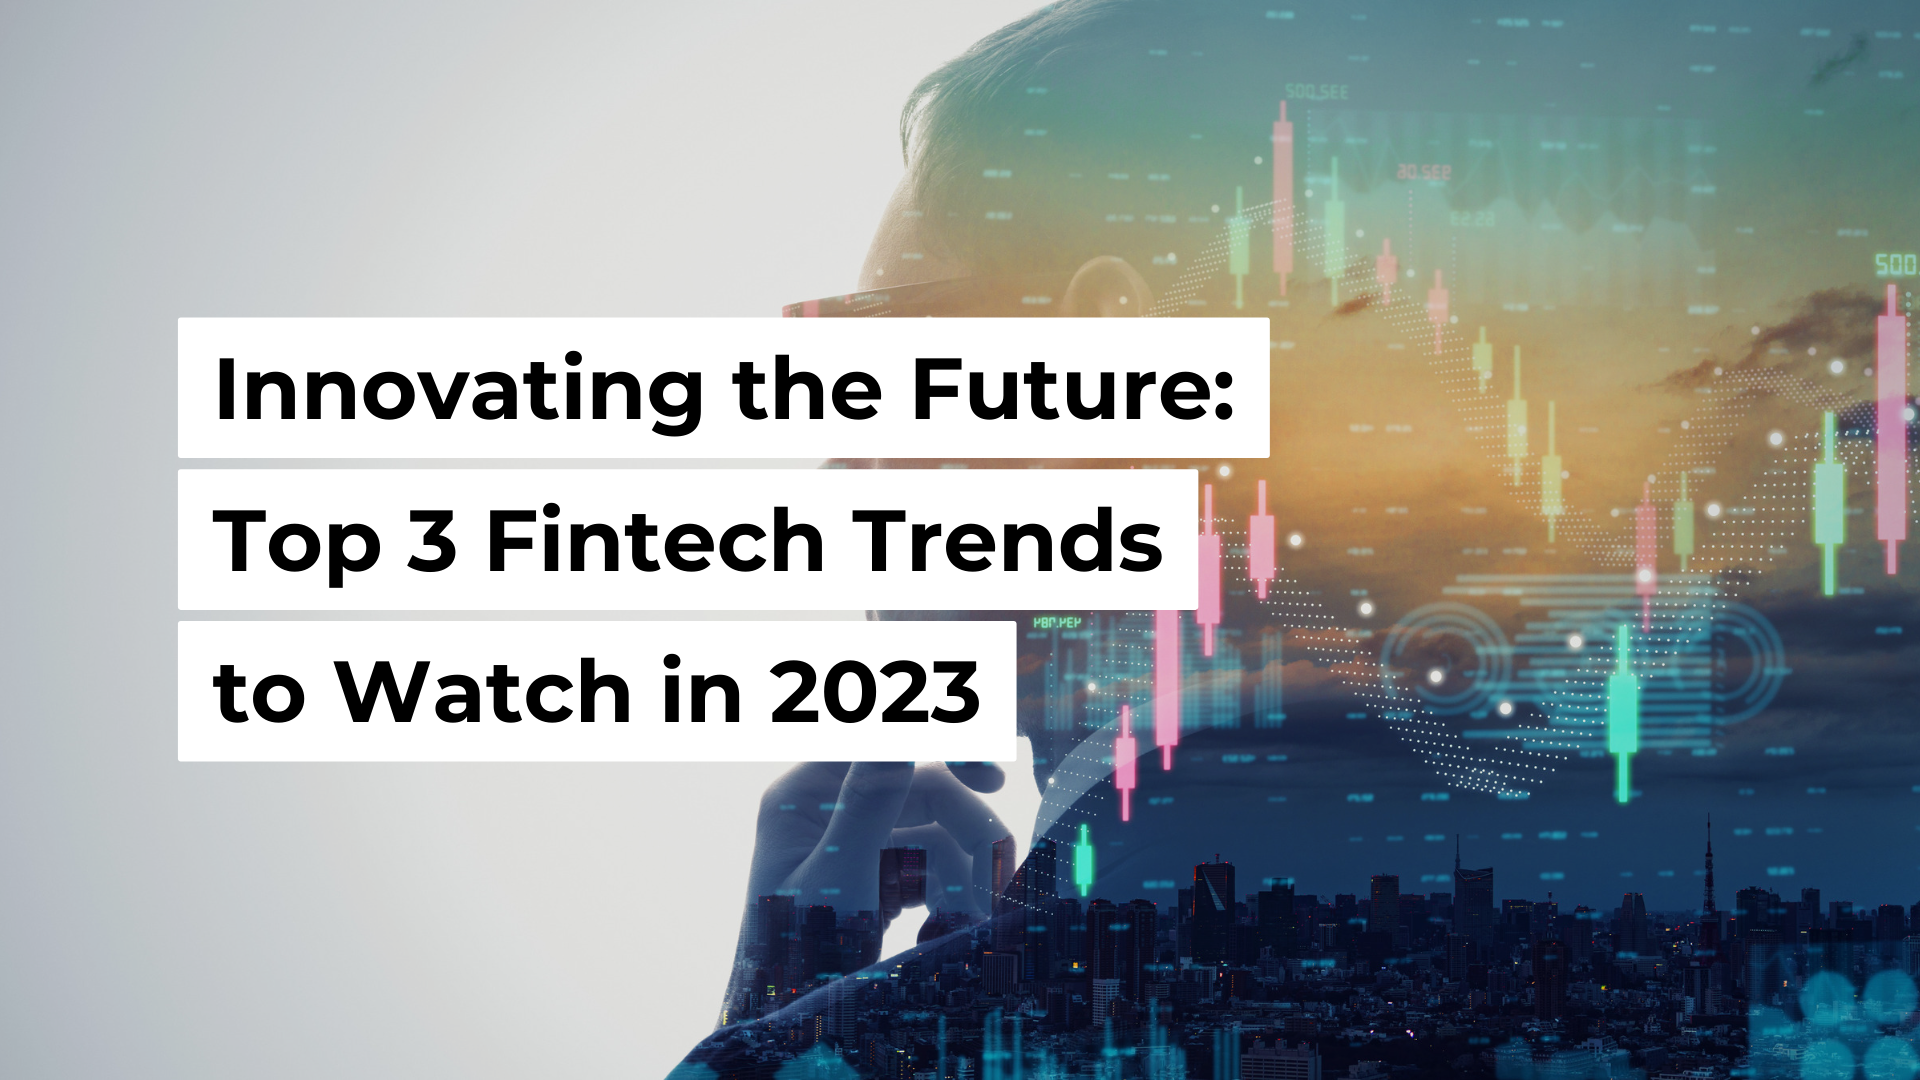 Innovating the Future: Top 3 Fintech Trends to Watch in 2023